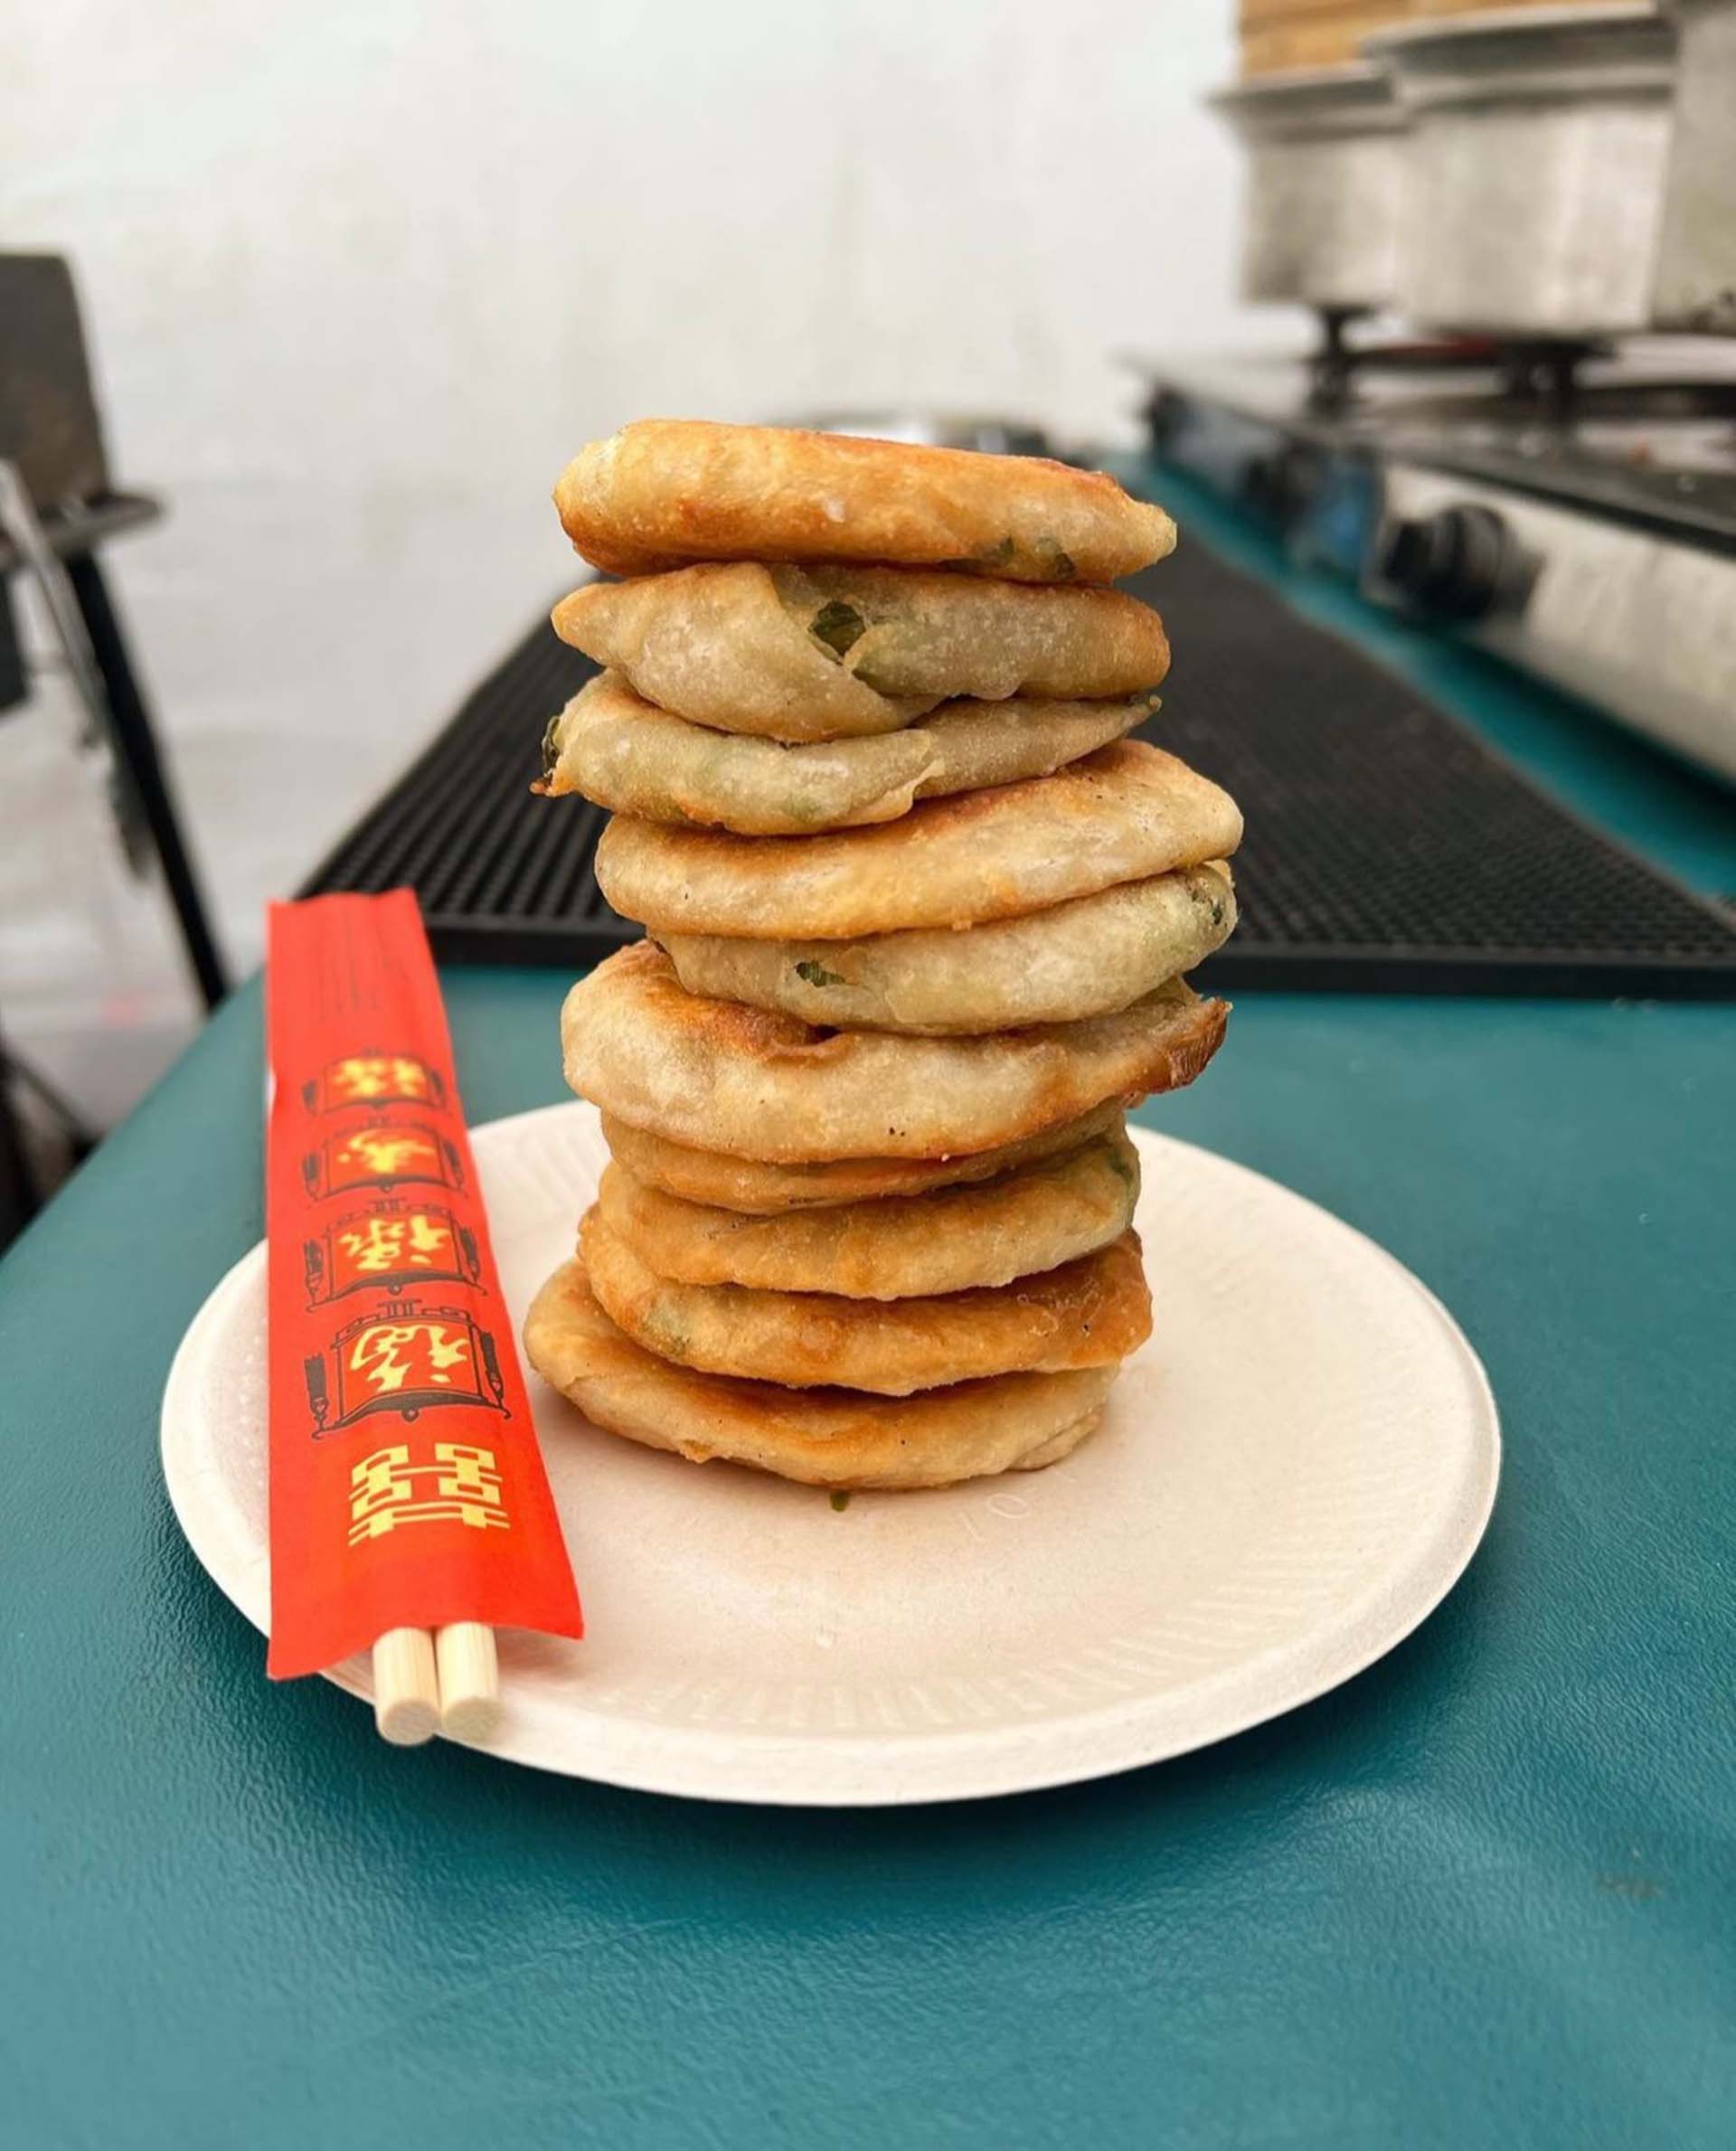 A stack of scallion pancakes on a white plate.